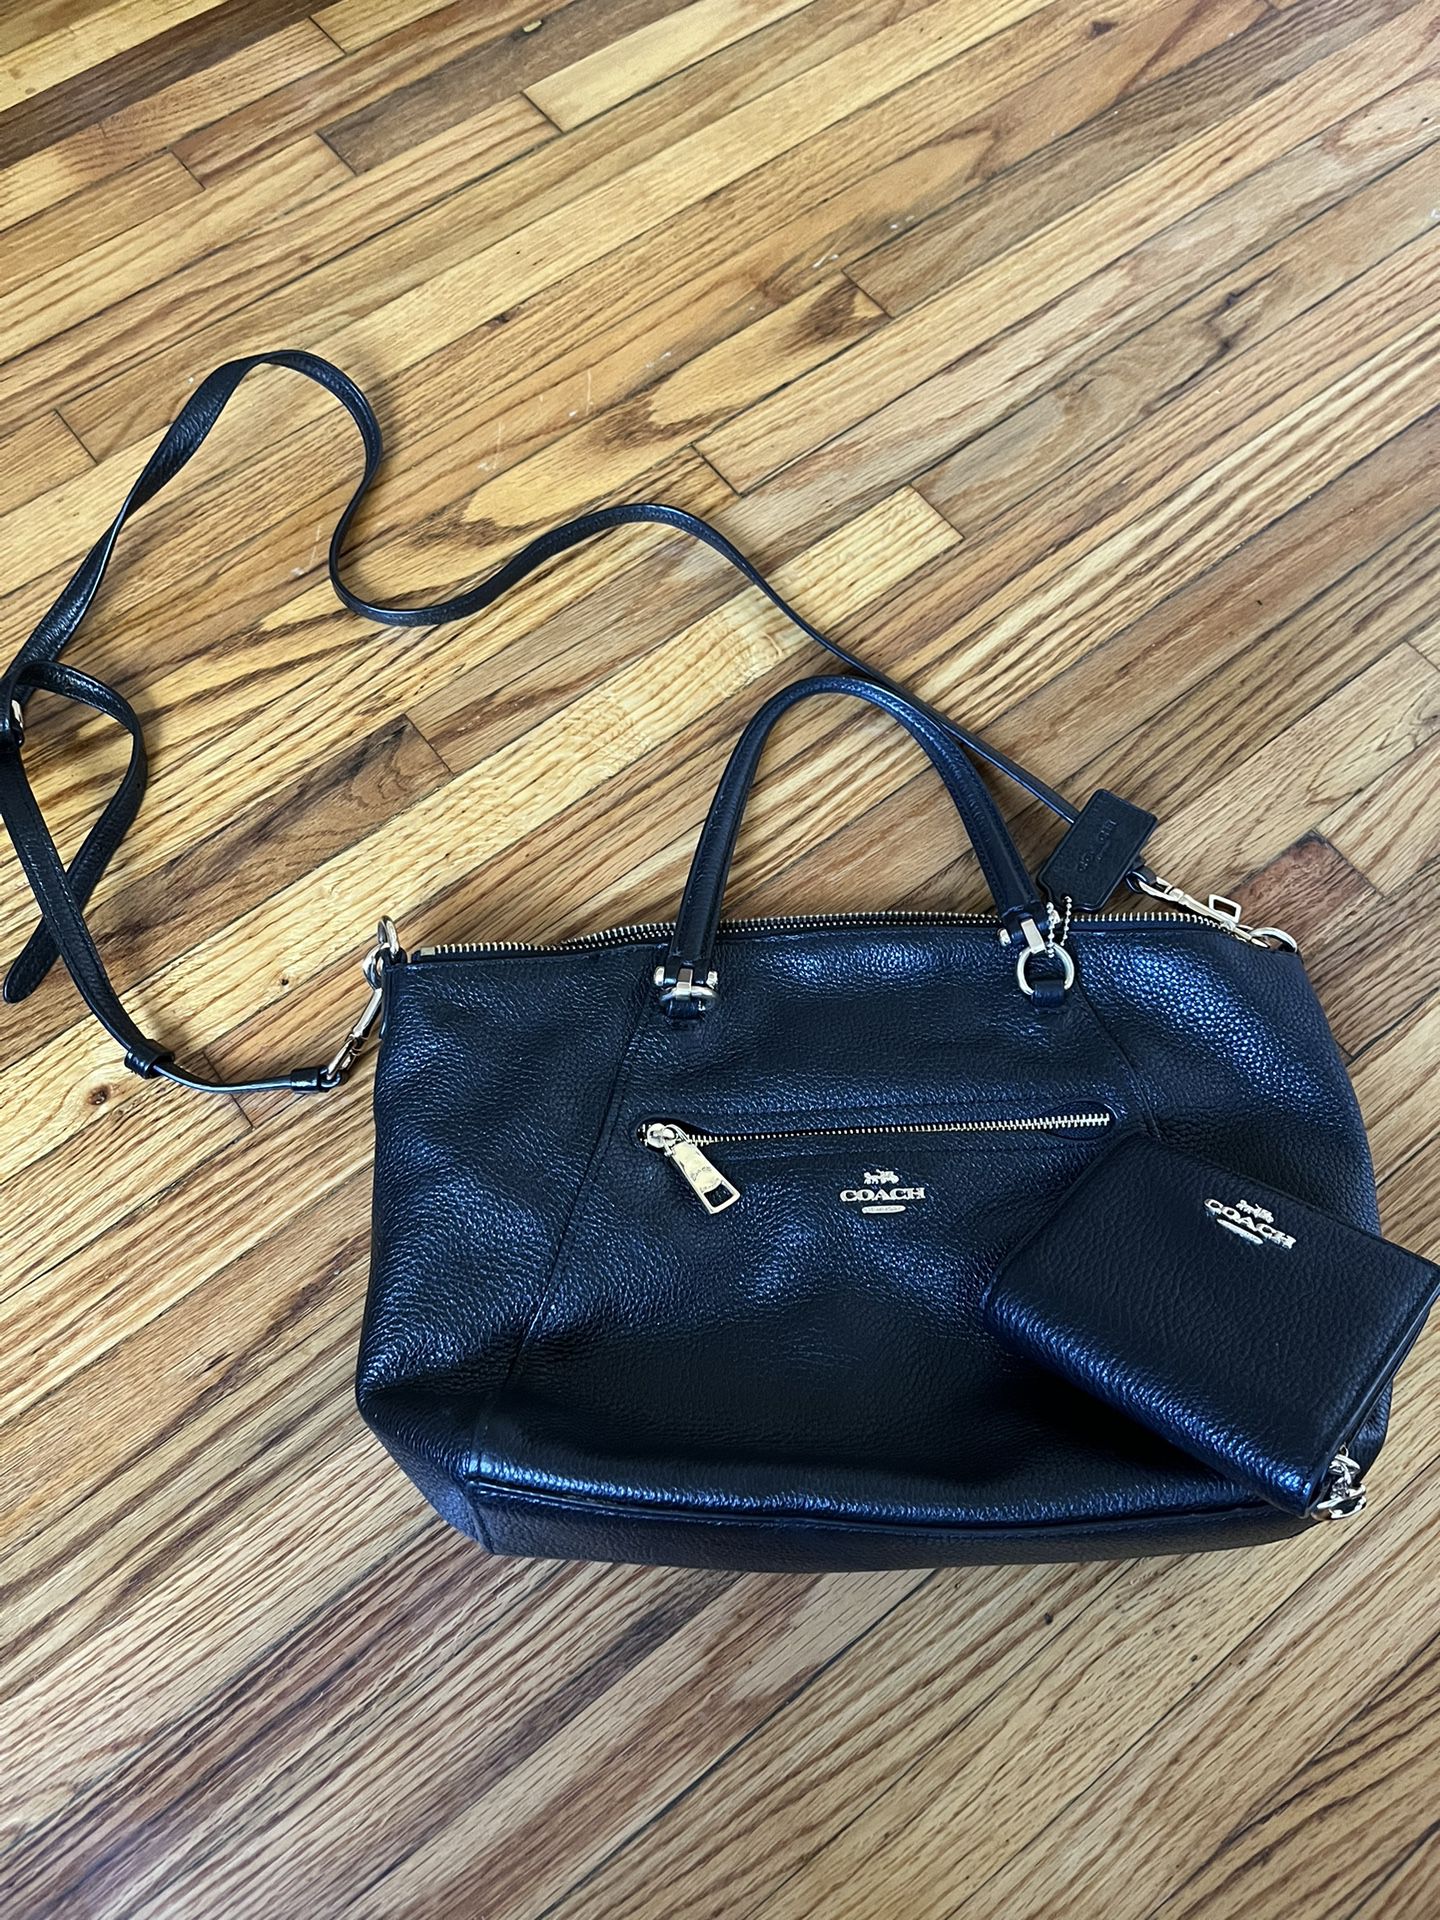 Black Leather Coach Purse And Wallet